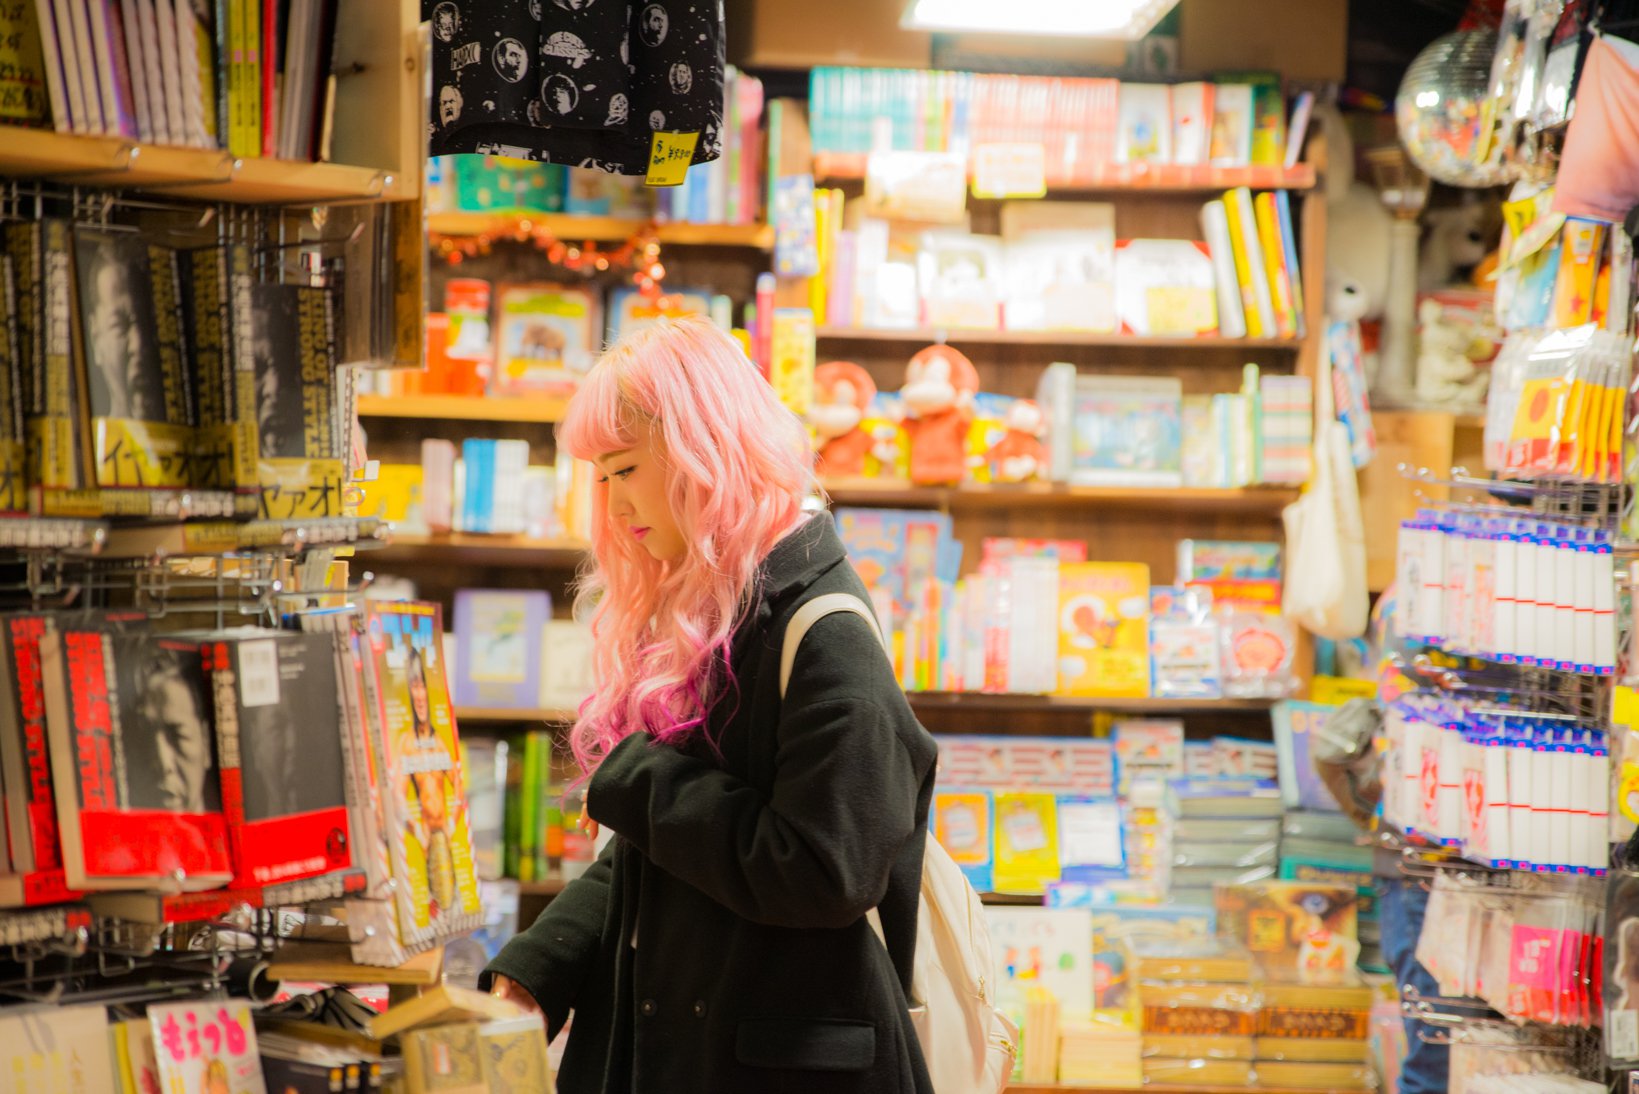 Anime Goods and Party Items, All in a Super Chaotic Bookstore?! Village Vanguard Shibuya Udagawa Shop